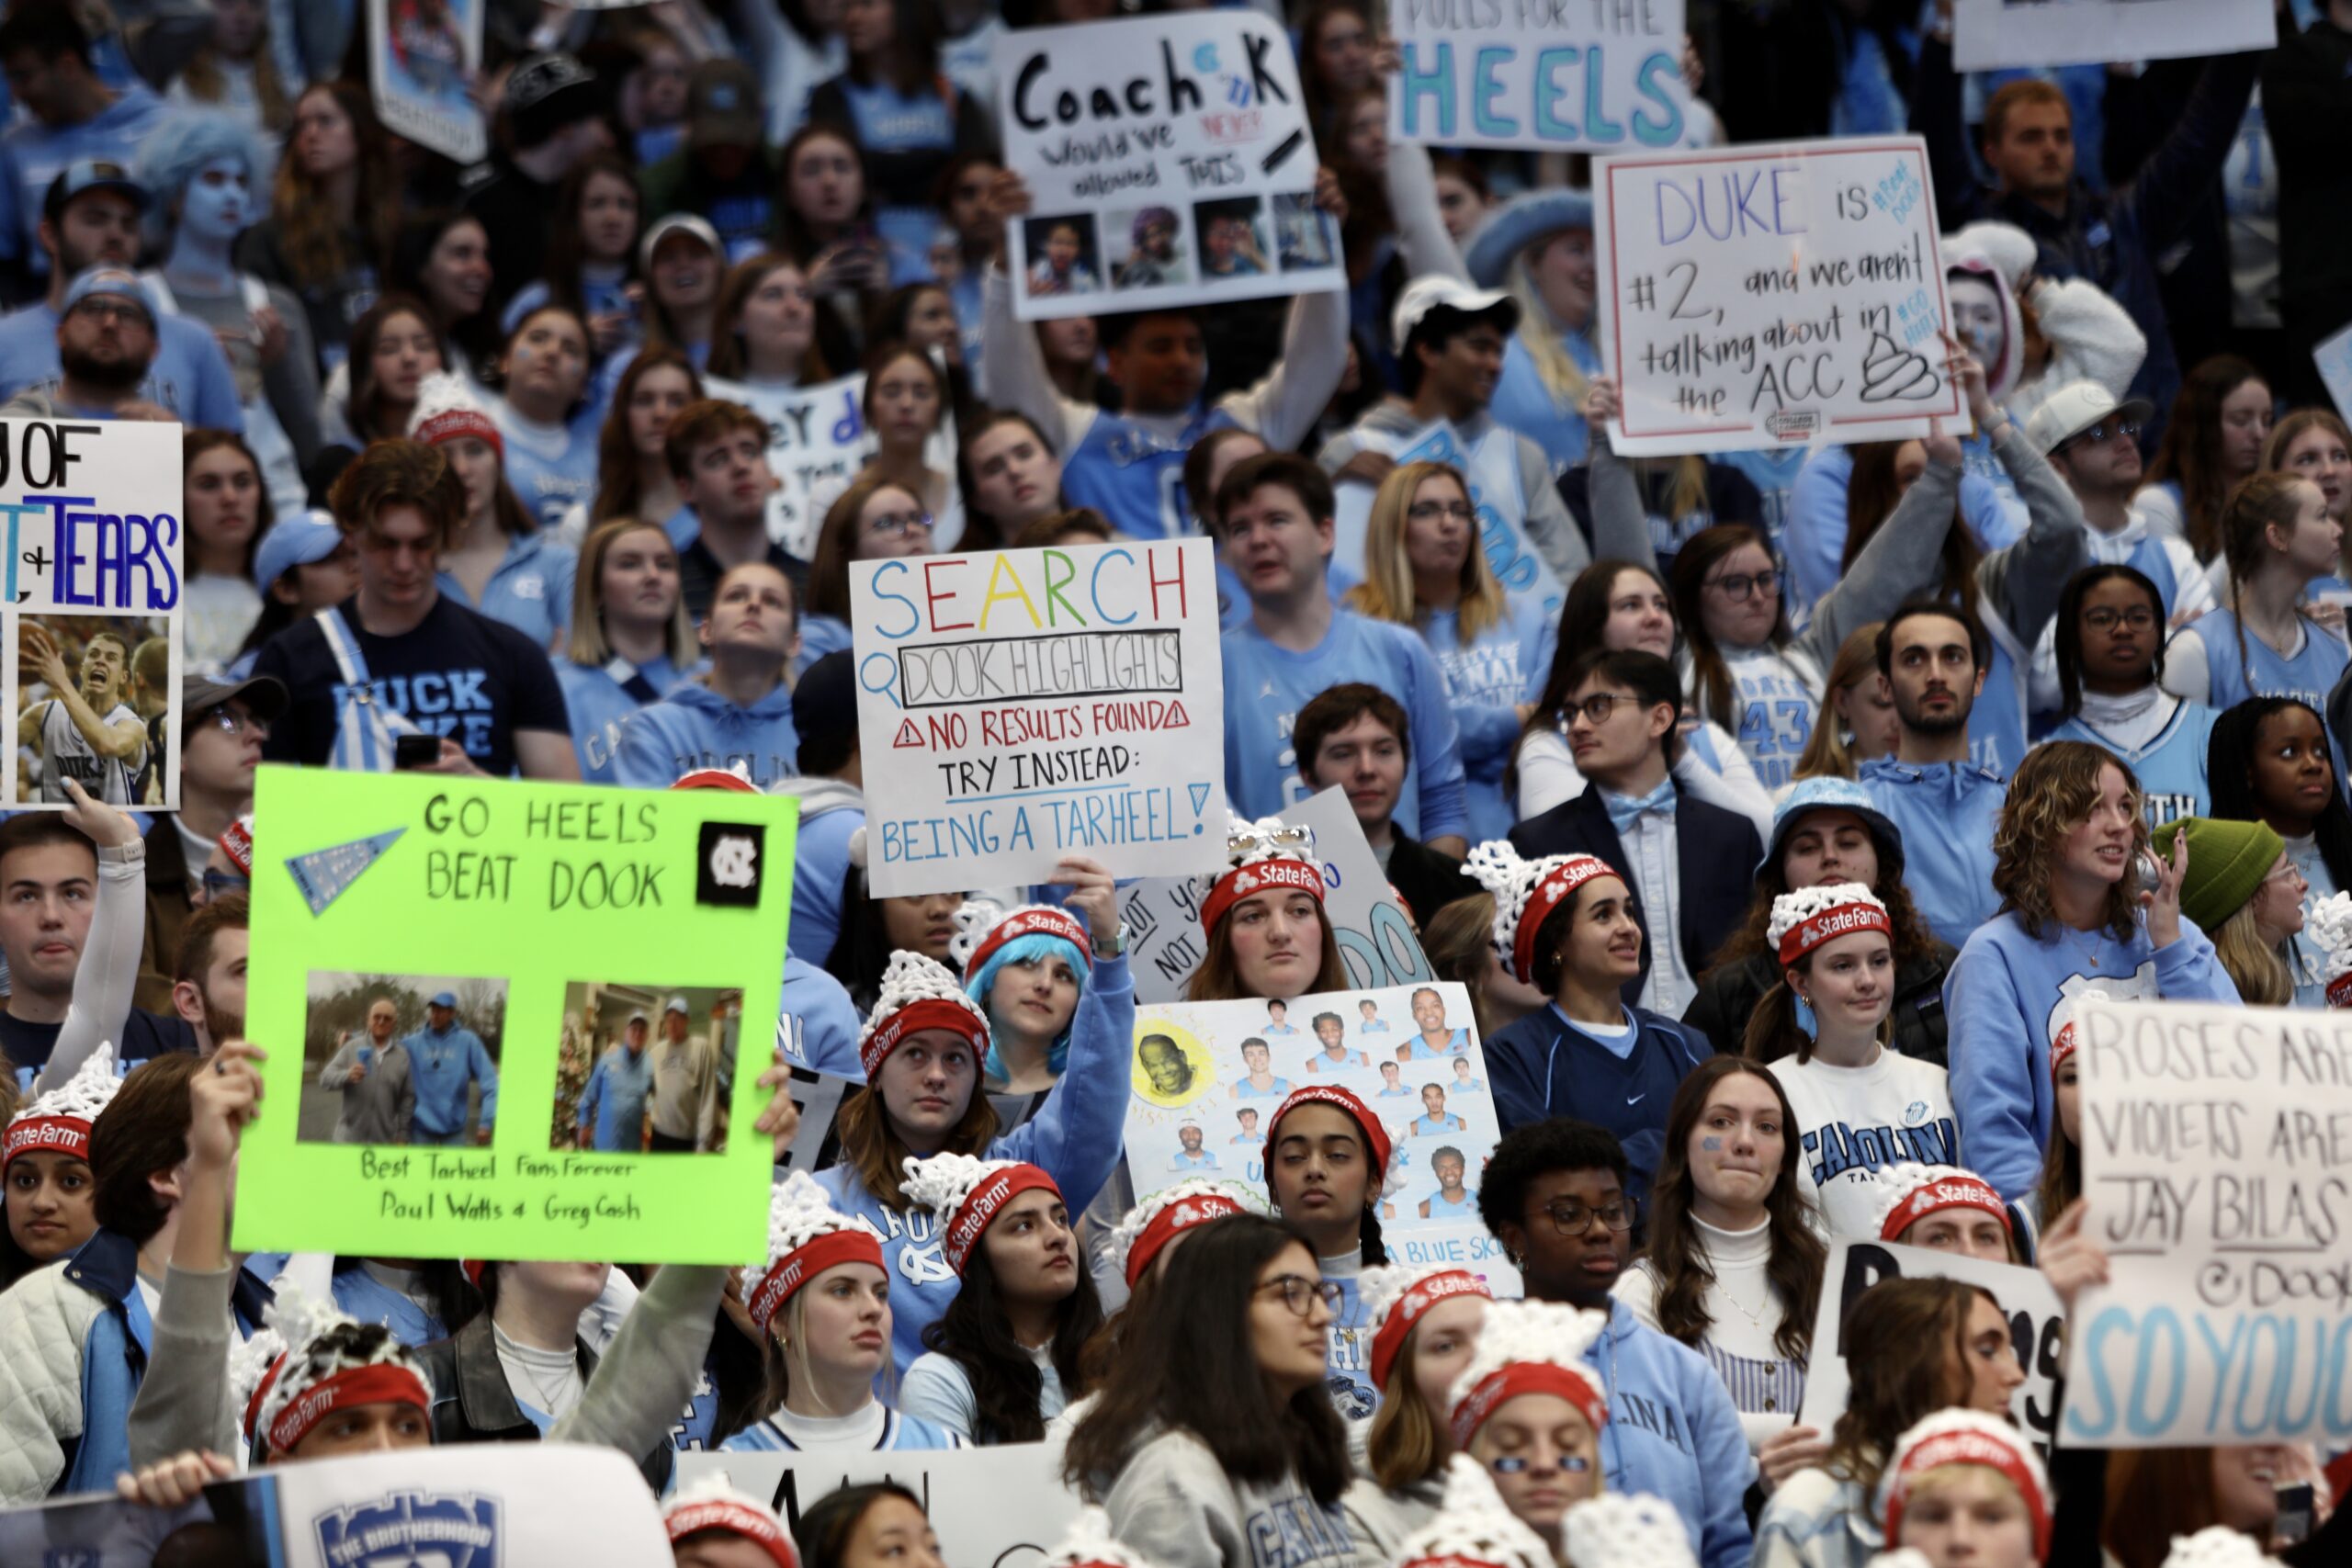 Fans in the stands of the Dean Smith Center holding handmade signs